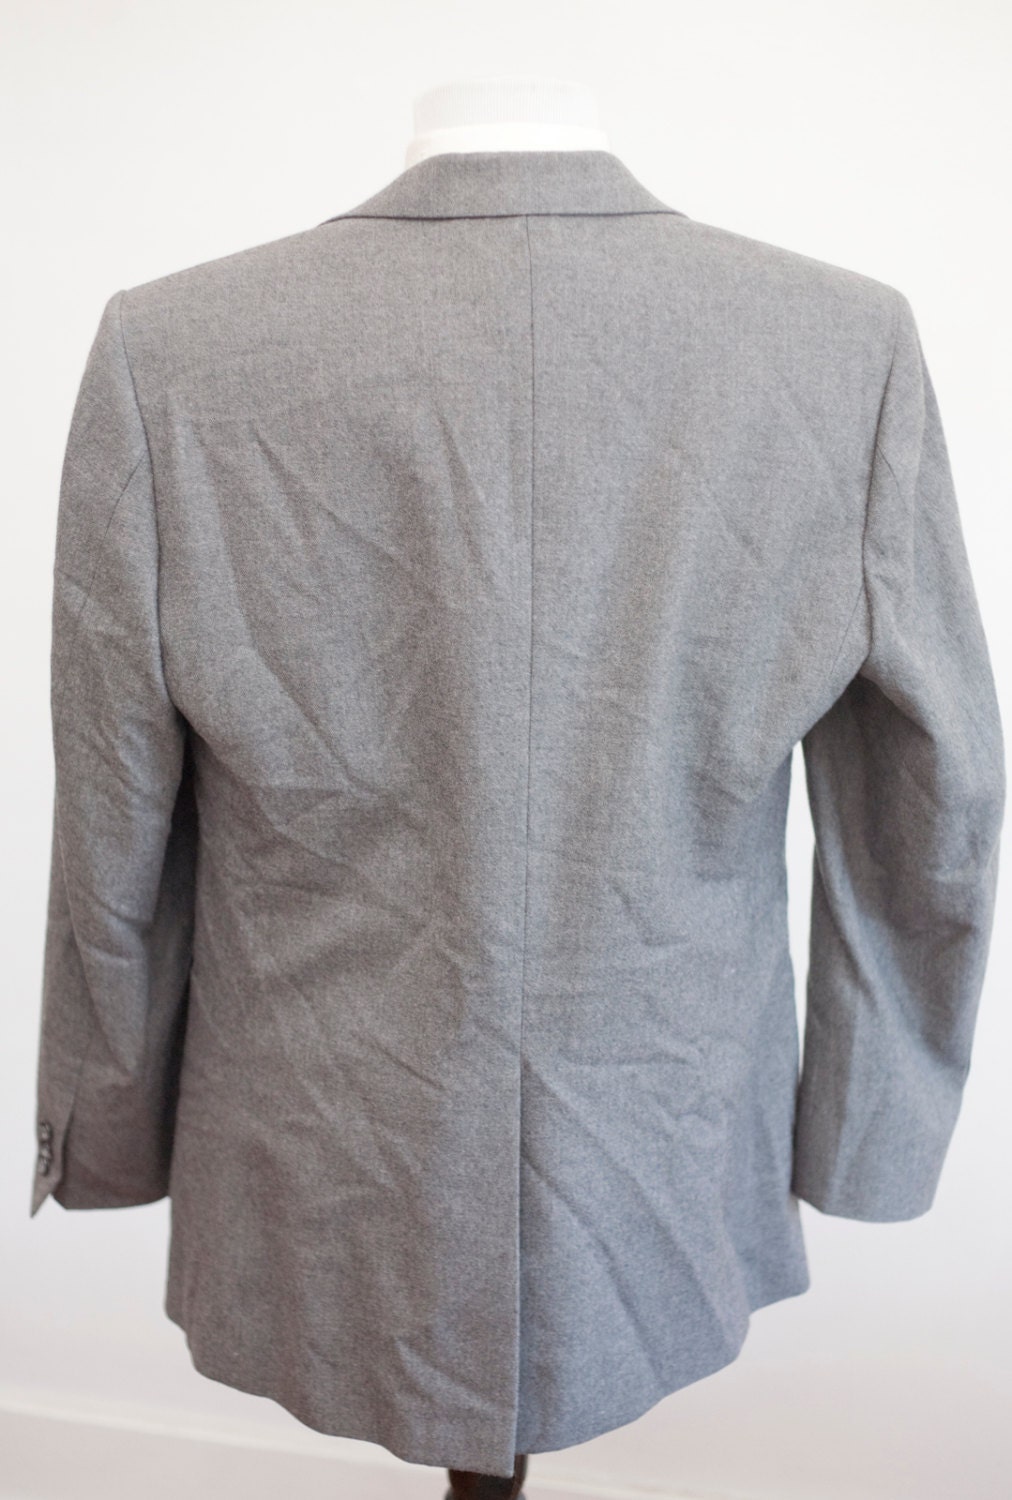 Men's Blazer and Trousers / Vintage Grey Wool Suit by JJ - Etsy